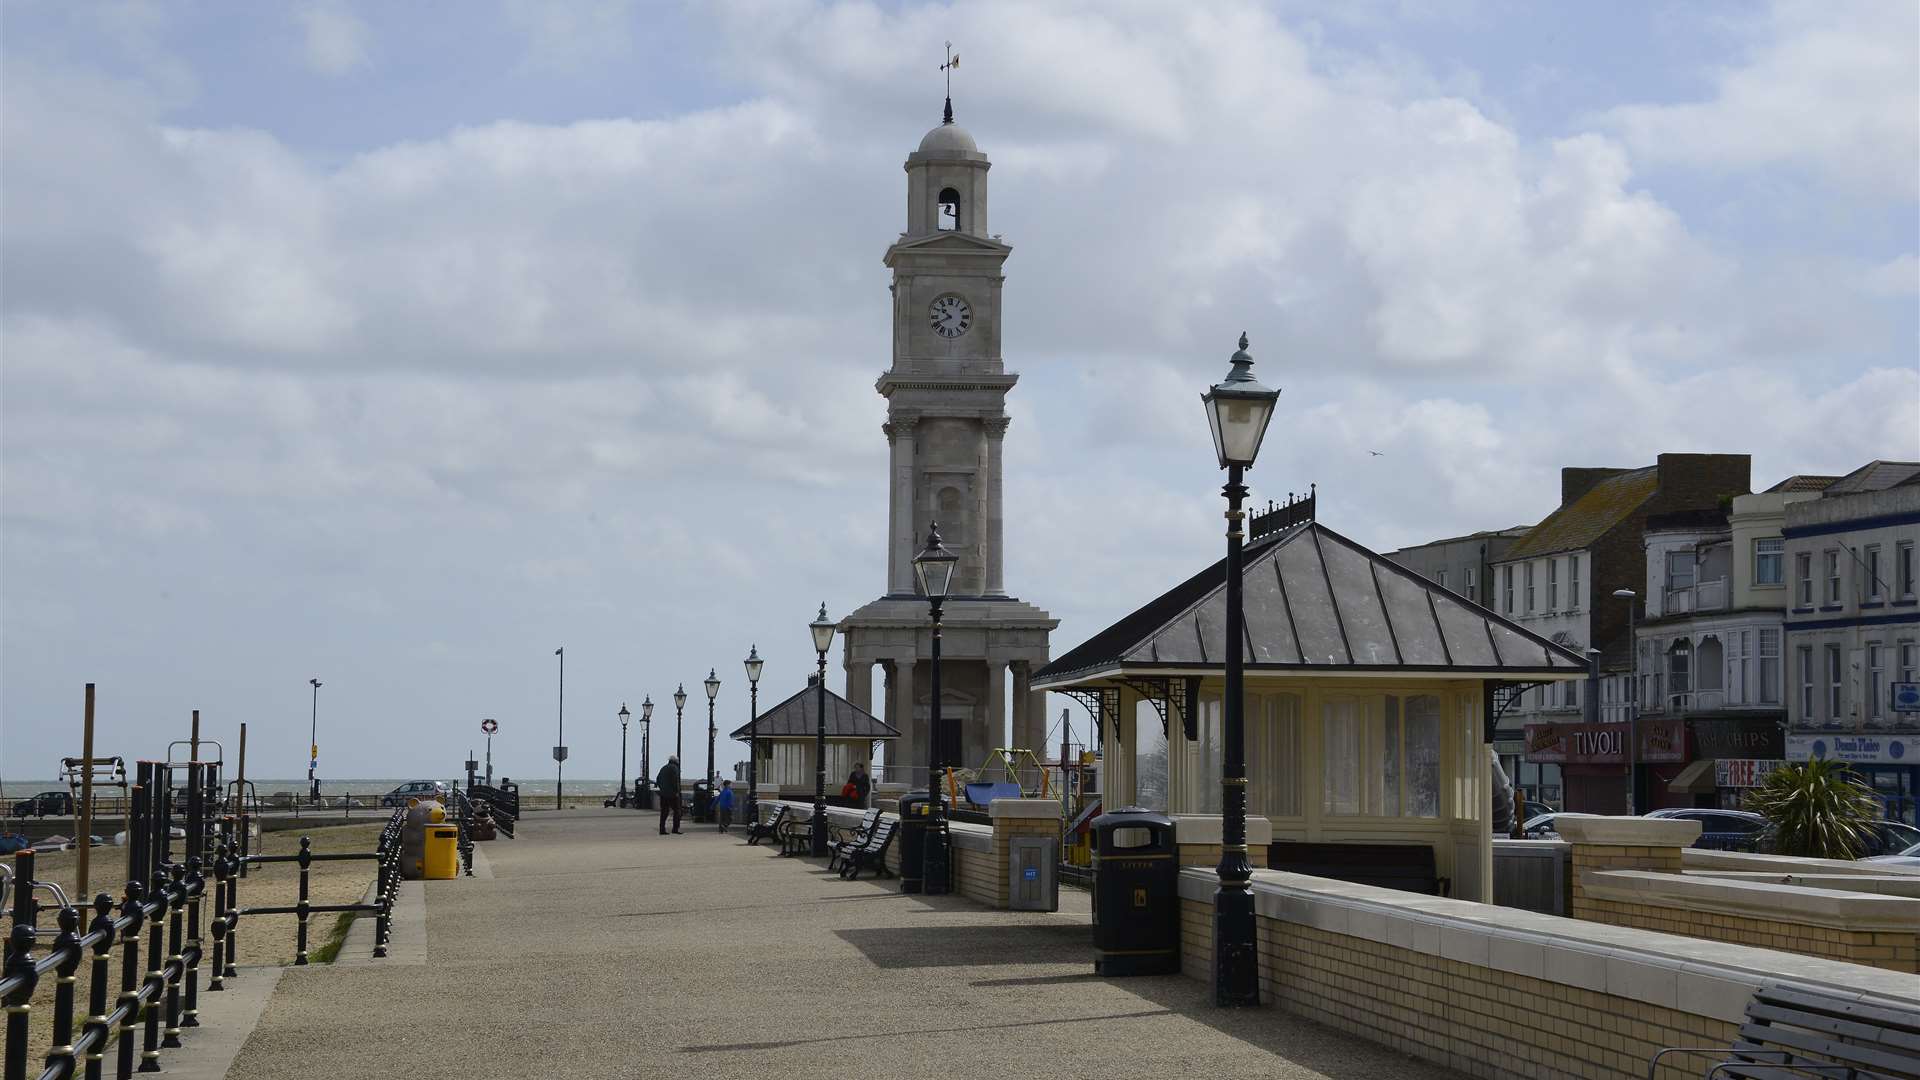 The teenager was attacked outside Herne Bay clock tower on the night of April 6.